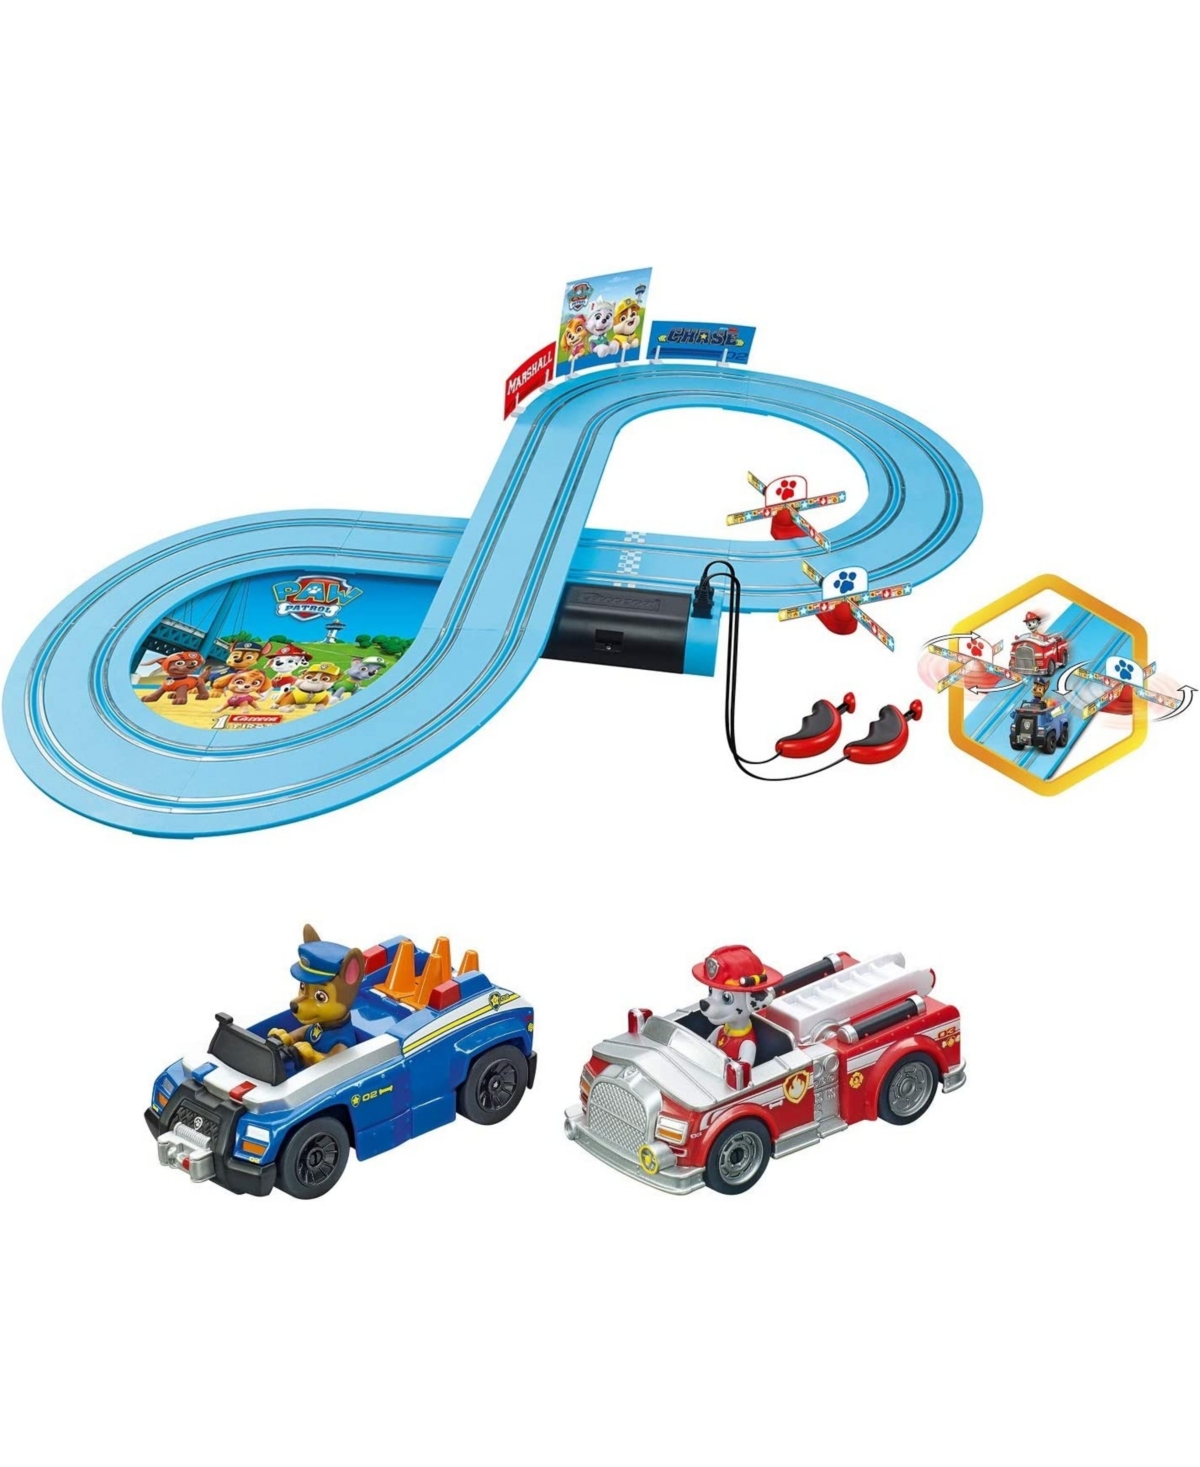 Carrera First Paw Patrol Slot Car Race Track Set In No Color